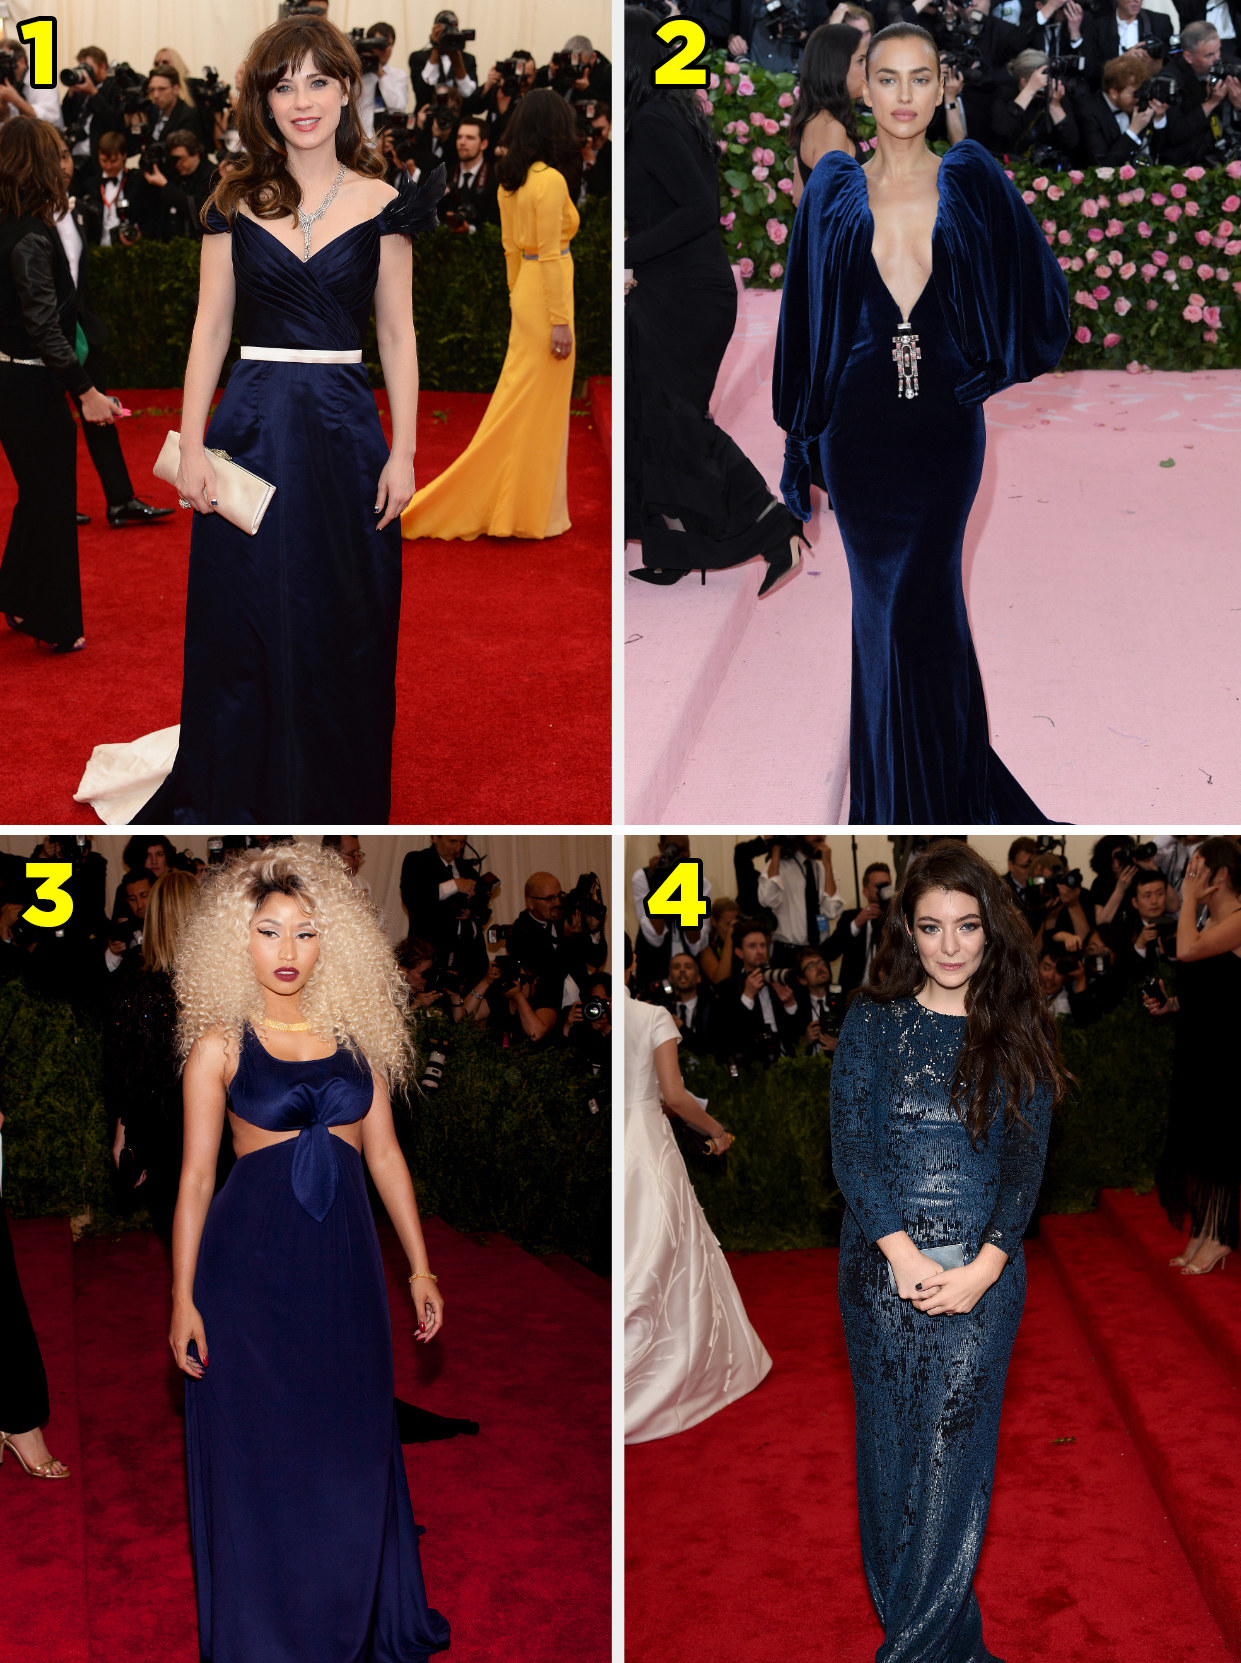 1. An off the shoulder gown with a sash cinching the waist. 2. A deep v gown with poofy sleeves. 3. A sleevless gown with cutouts by the ribs. 4. A long sleeve gown with a lace floral pattern.